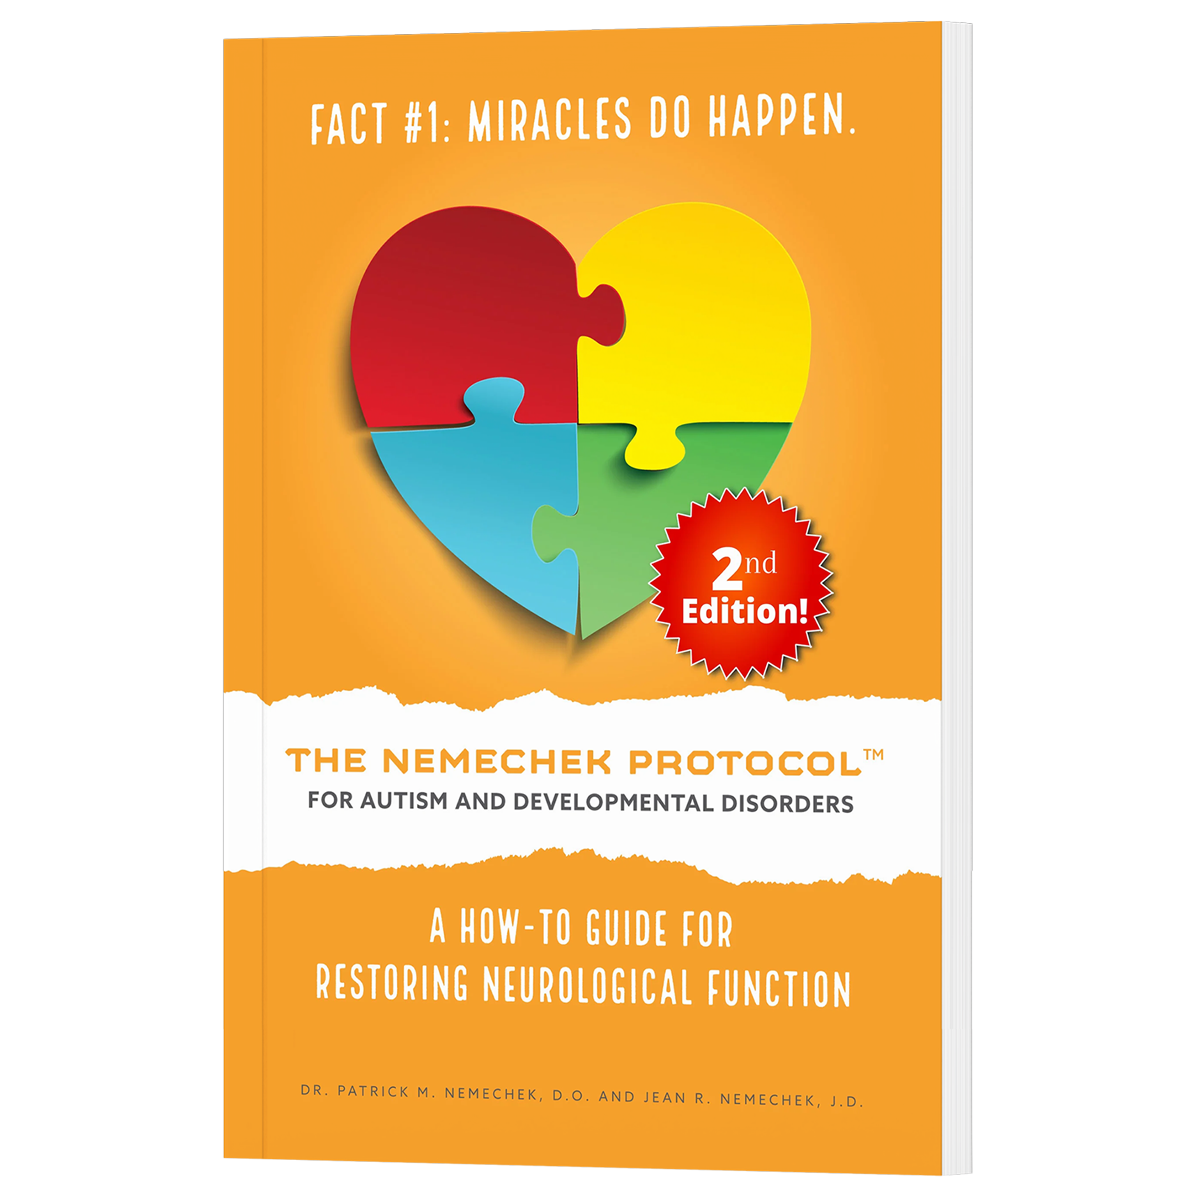 FREE GIFT - The Nemechek Protocol for Autism and Developmental Disorders